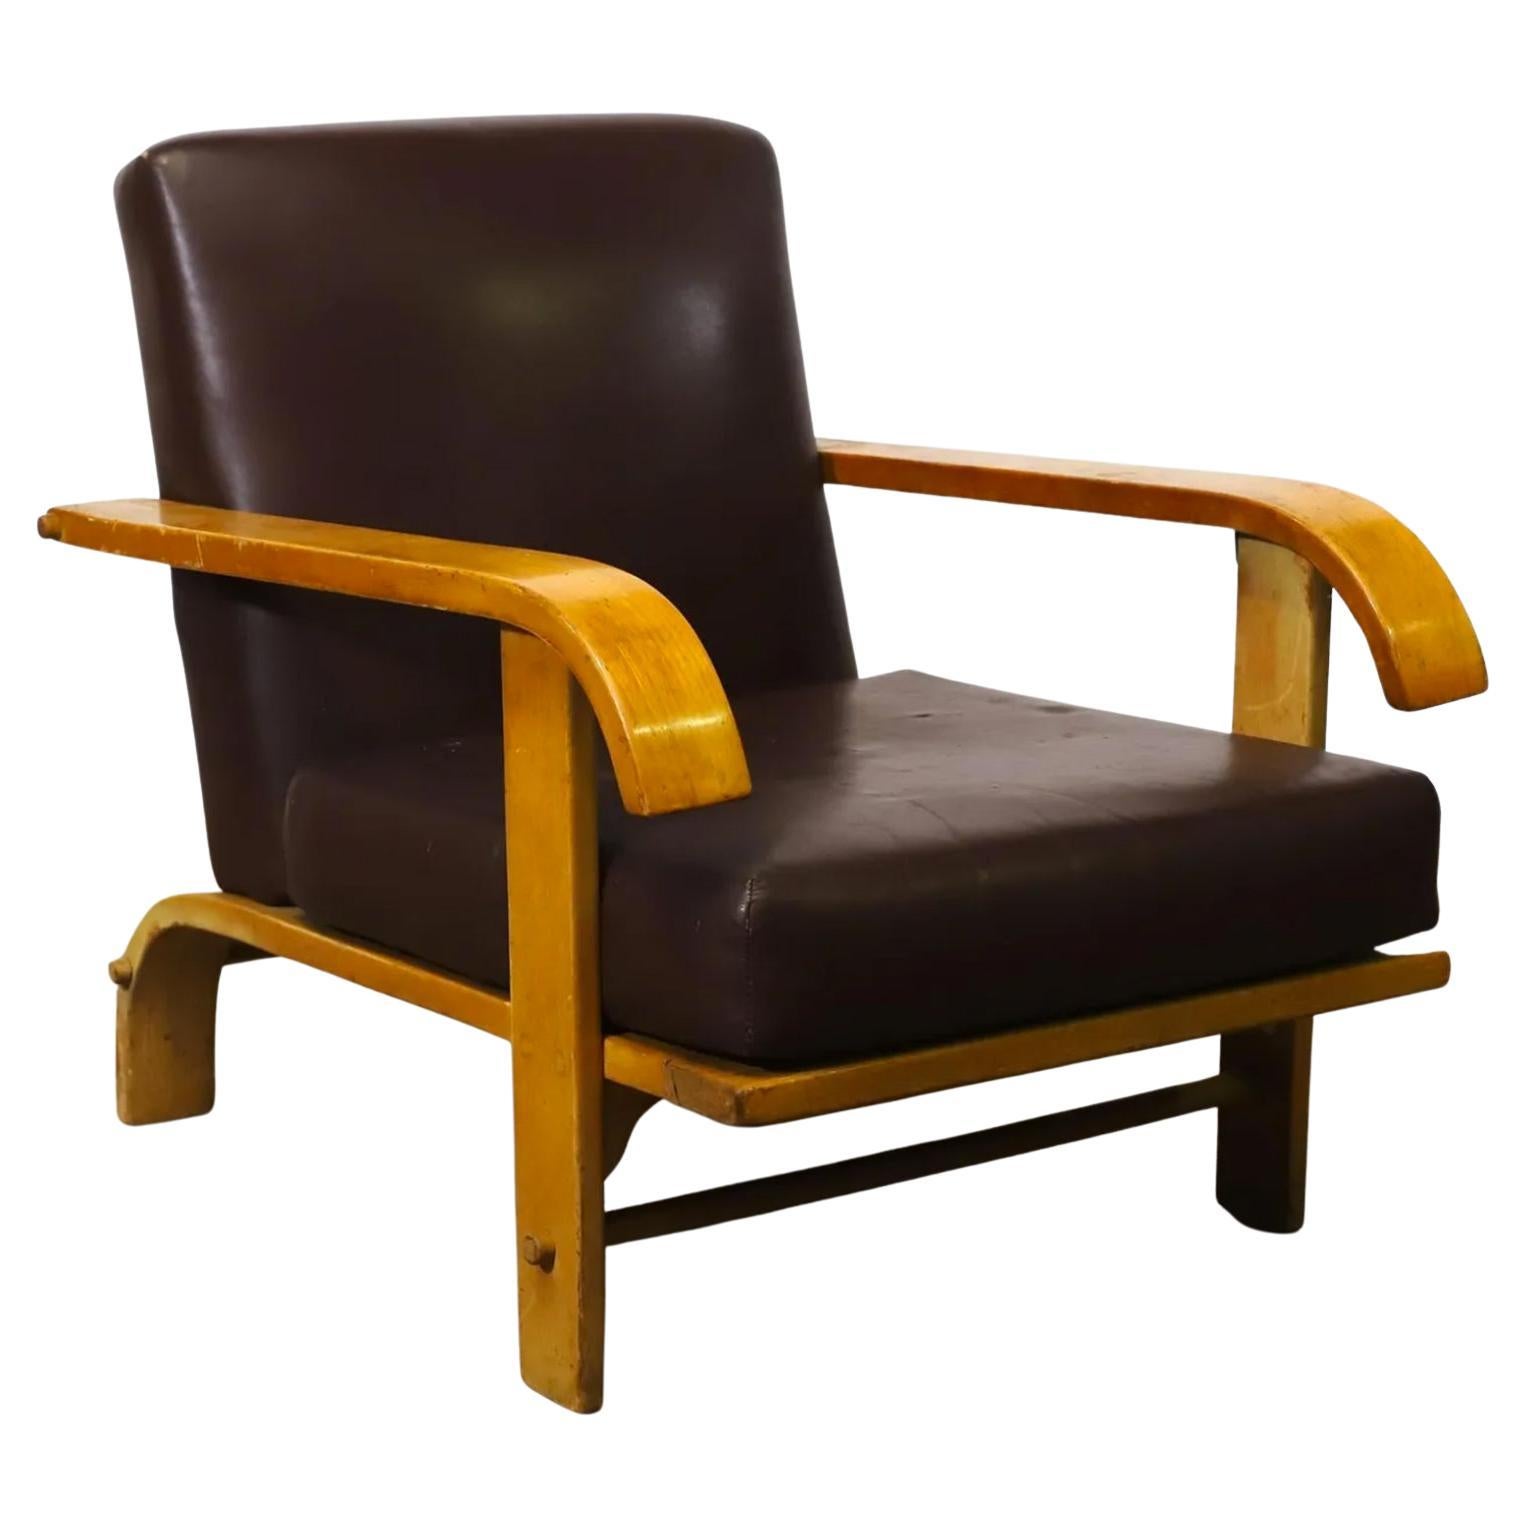 Rare original mid-century Russel Wright for Conant Ball. All maple low lounge chair. Arms have unique downward curve - great Design. Solid Maple frames with curved back legs and all original dark brown leather upholstery. Original vintage condition